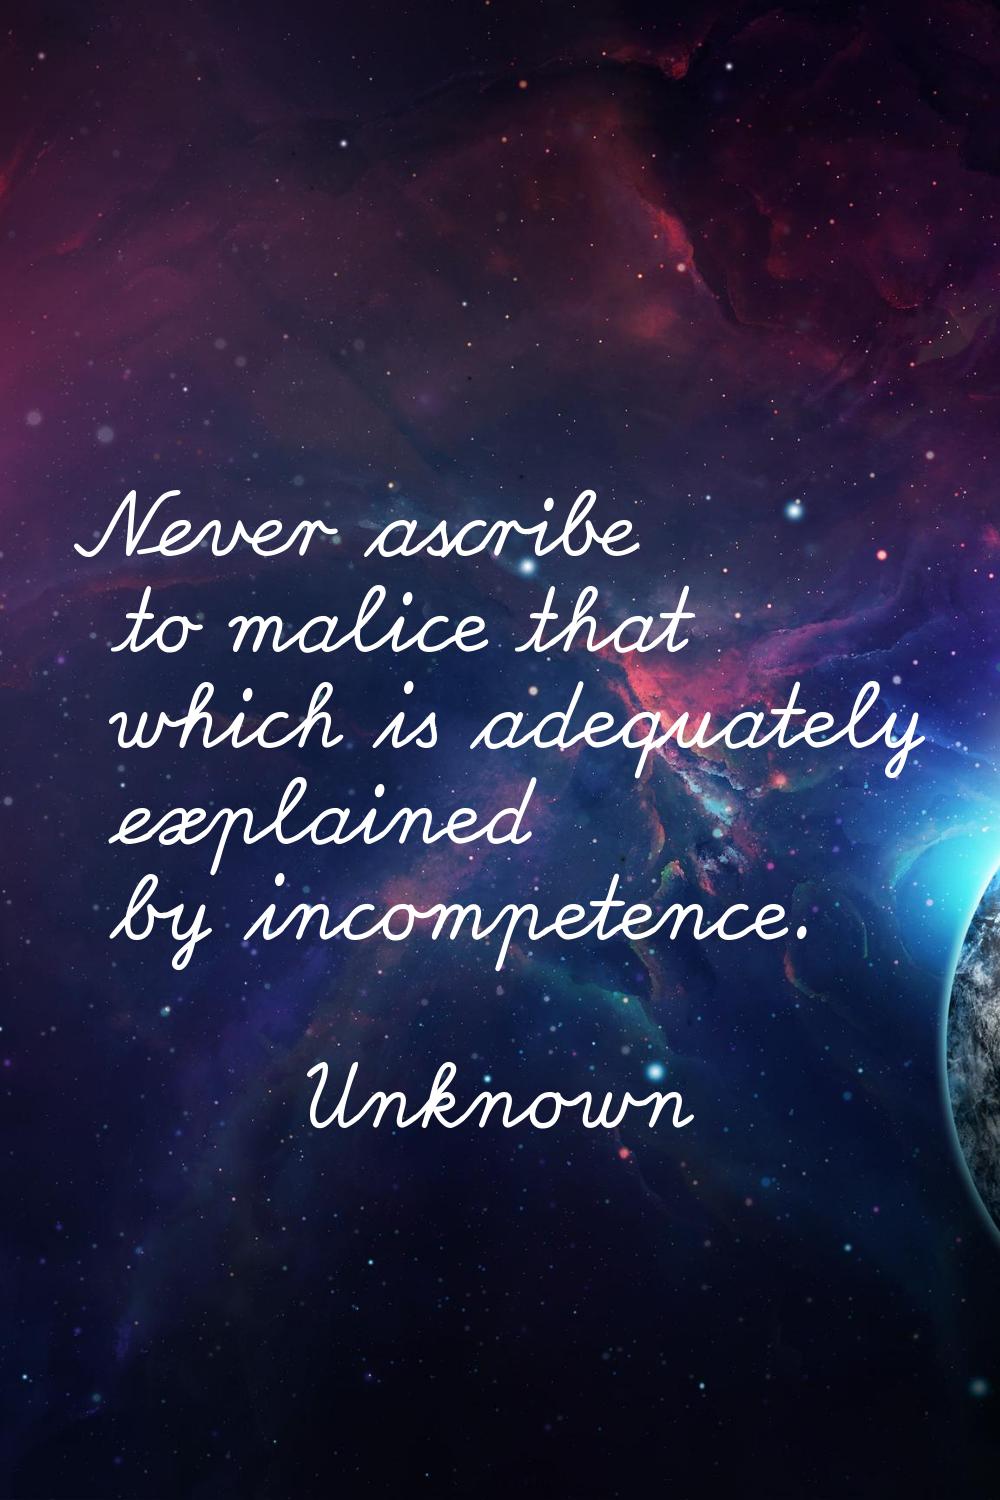 Never ascribe to malice that which is adequately explained by incompetence.